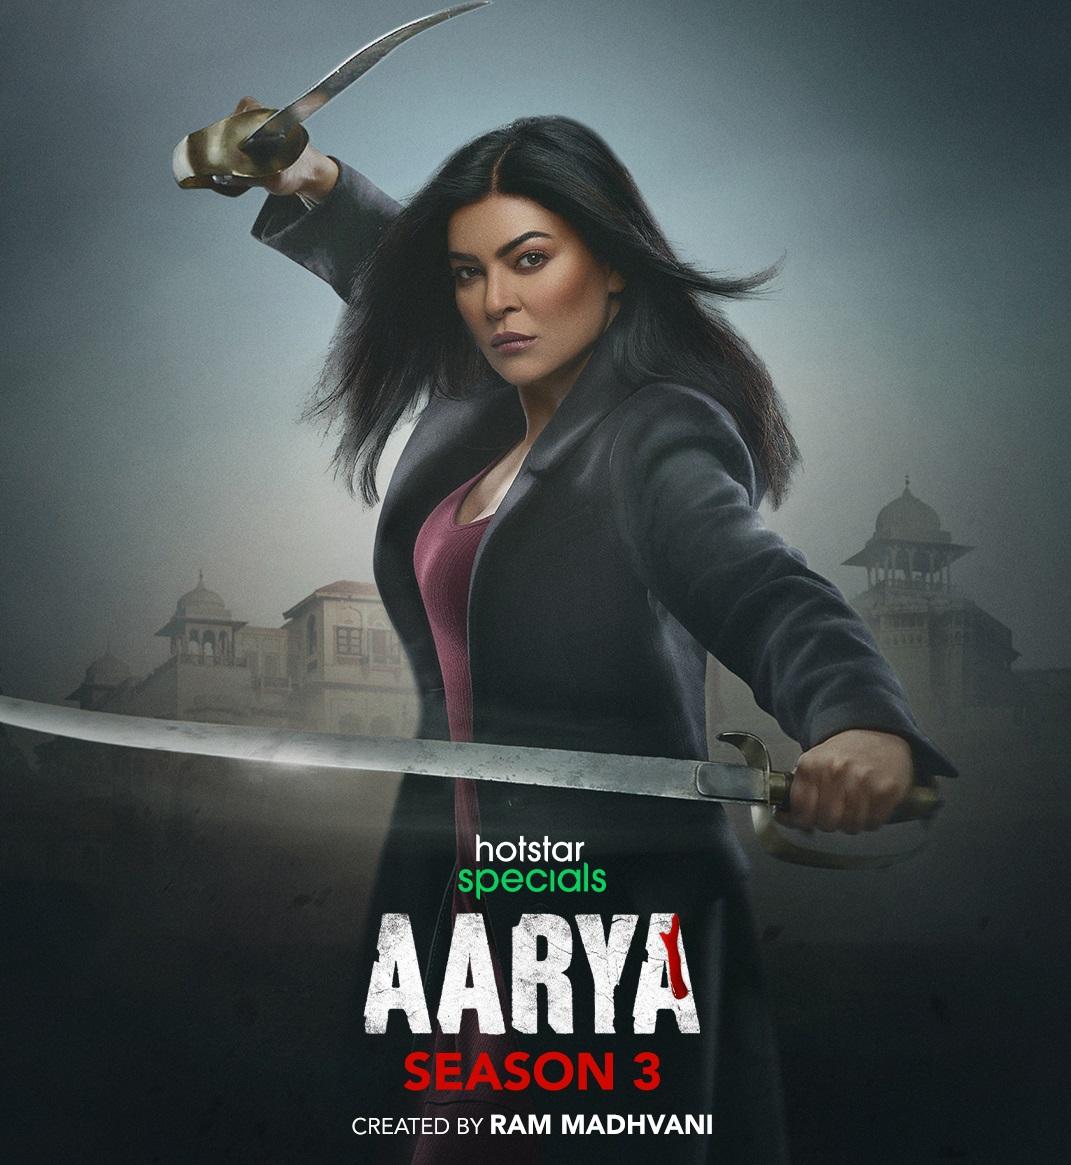 Aarya season 3 part 2 (February 9) - Streaming on Disney+ HotstarAarya season 3 part 2 sees Aarya Sareen (Sushmita Sen) confronting new challenges in the perilous world of crime and drugs to protect her family. Dubbed Aarya Antim Vaar, the final set of episodes focuses on Aarya's resilience and strategic acumen as she faces ACP Khan’s pursuit and a quest for vengeance.